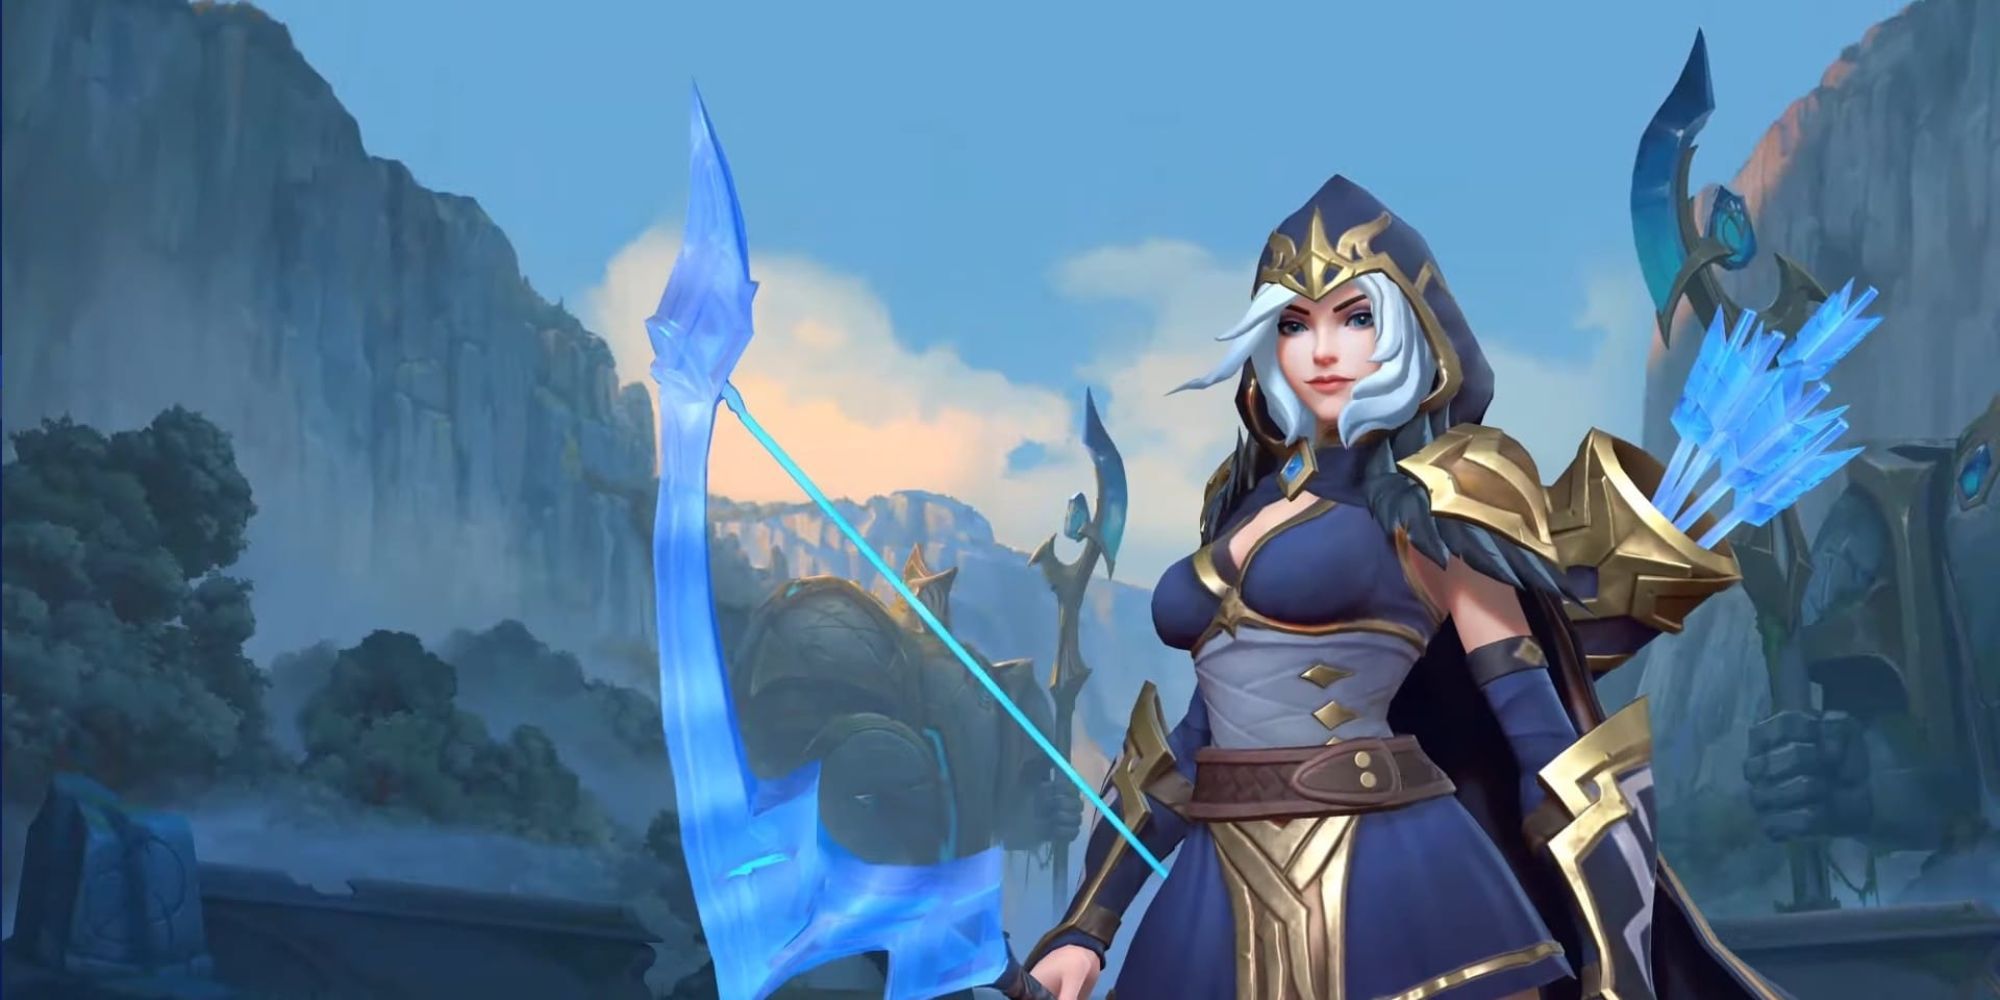 Ashe Standing In Summoner's Rift With Bow and Arrow